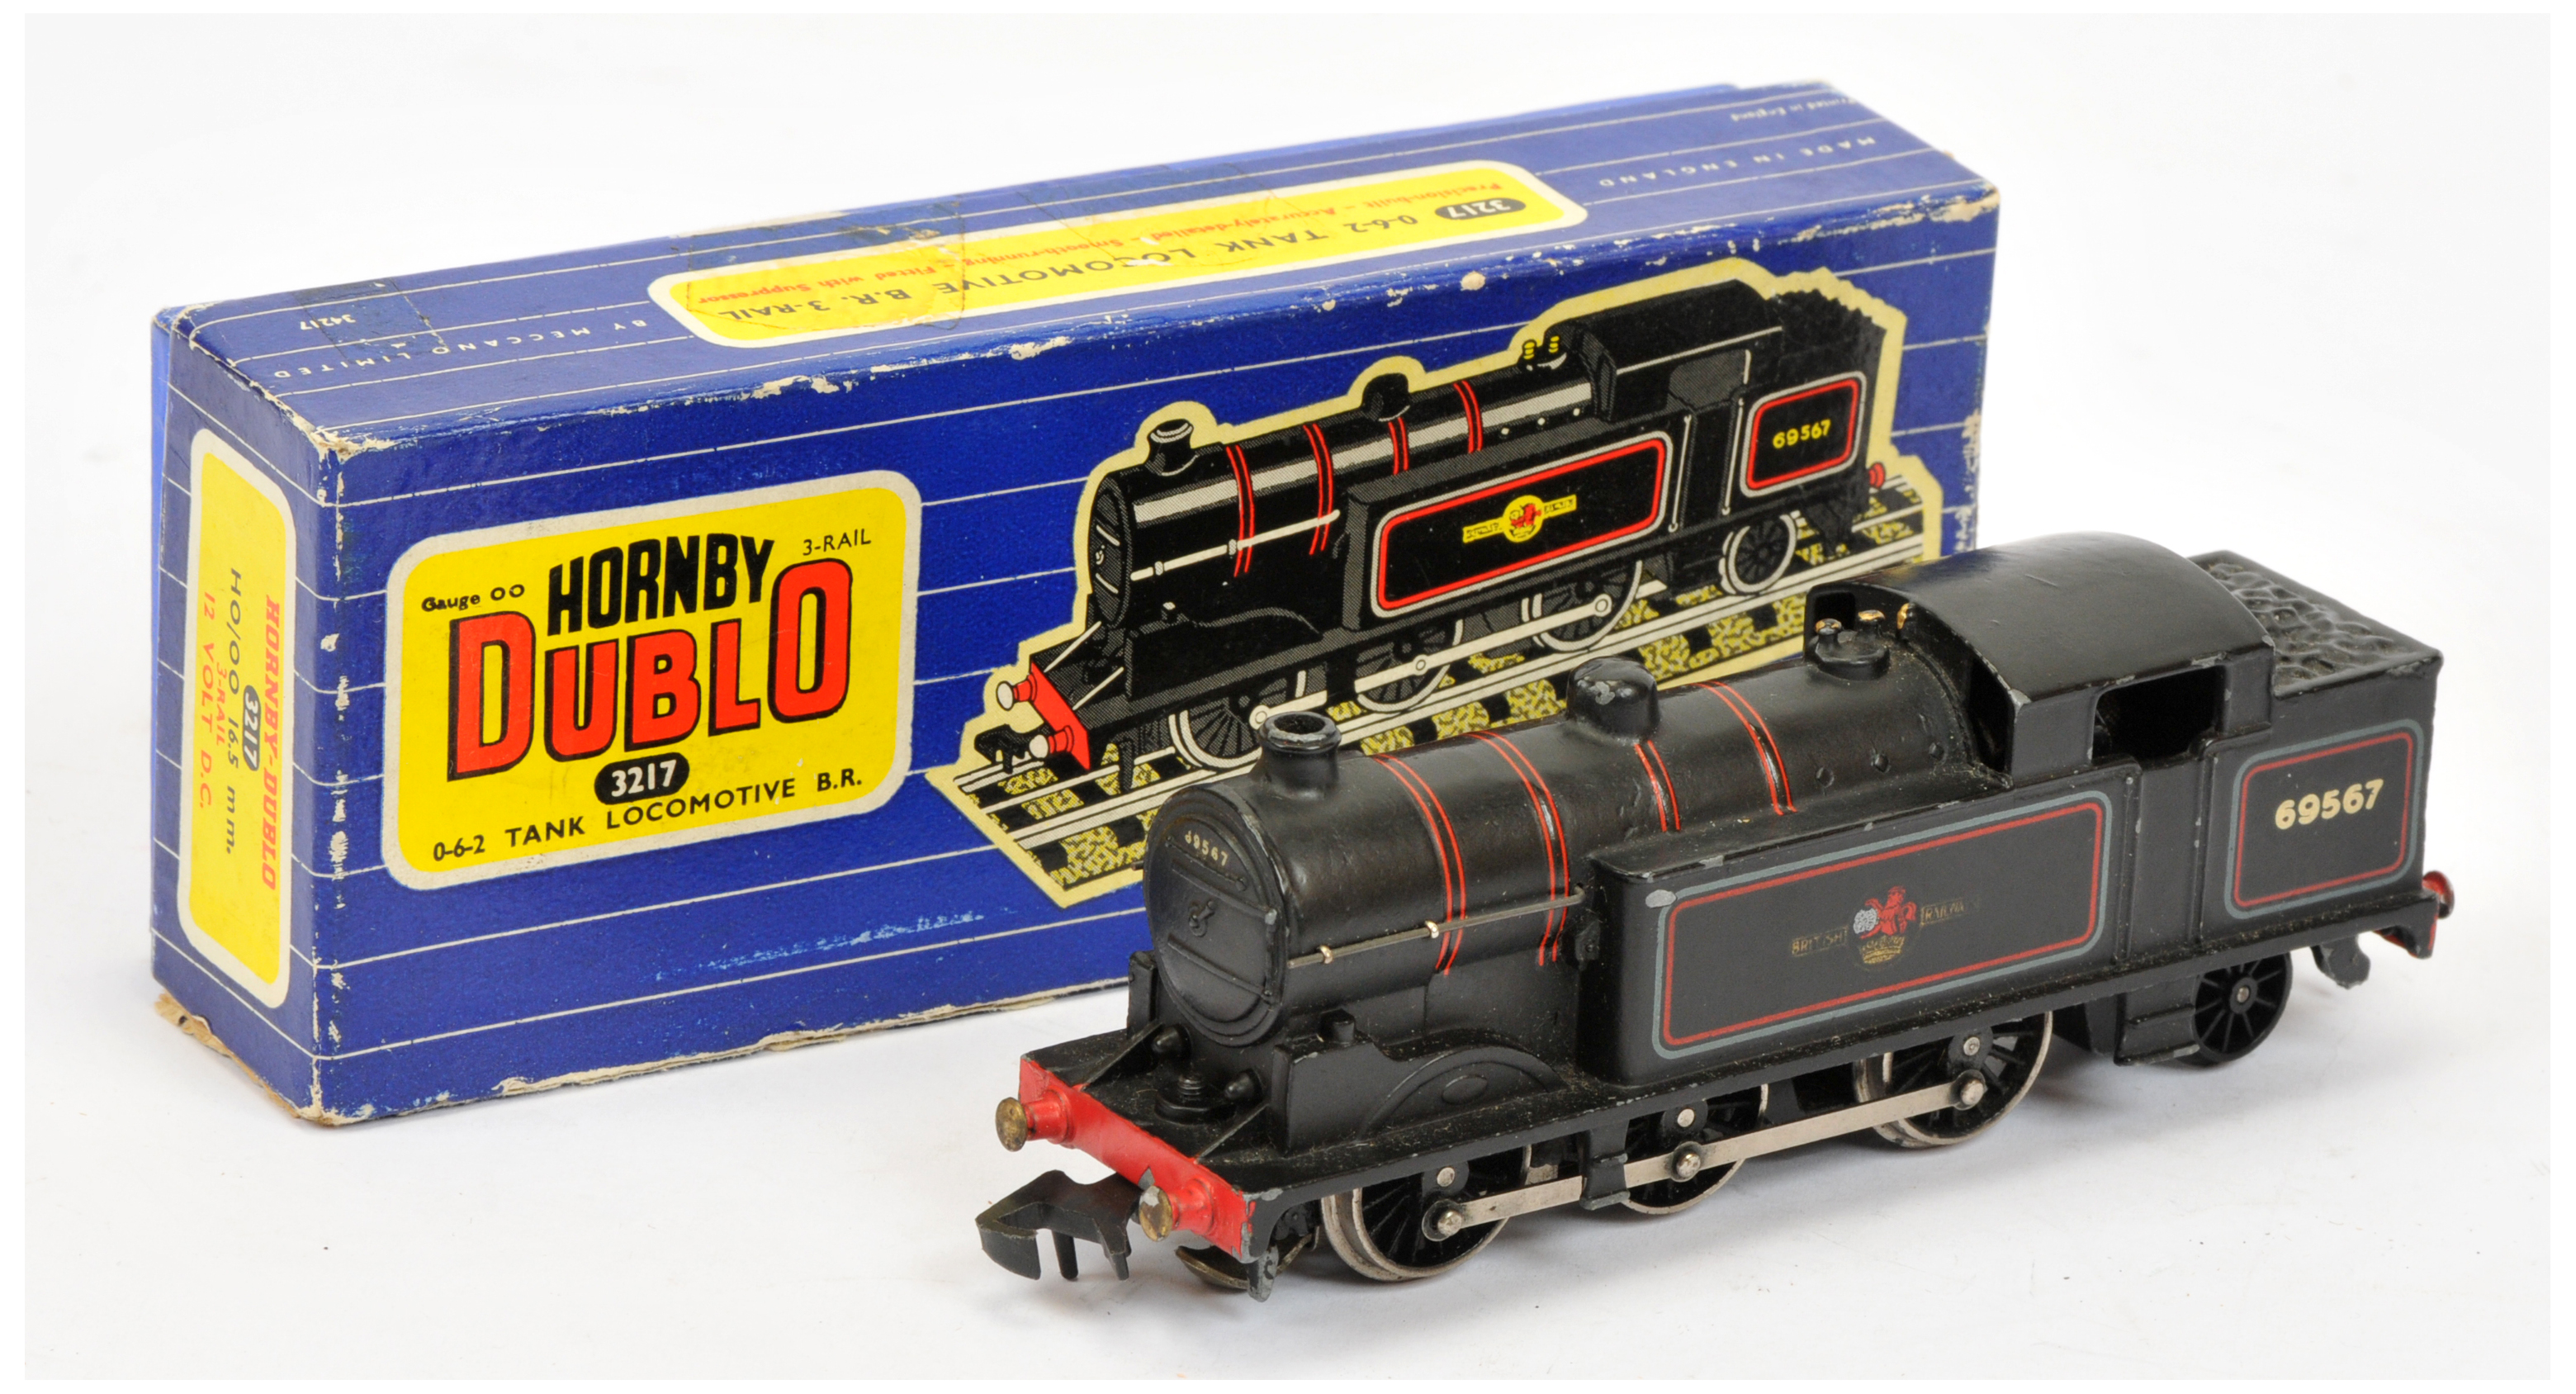 Hornby Dublo 3-rail 3217 0-6-2 BR lined black N2 Class Tank No.69567 with coal in bunker